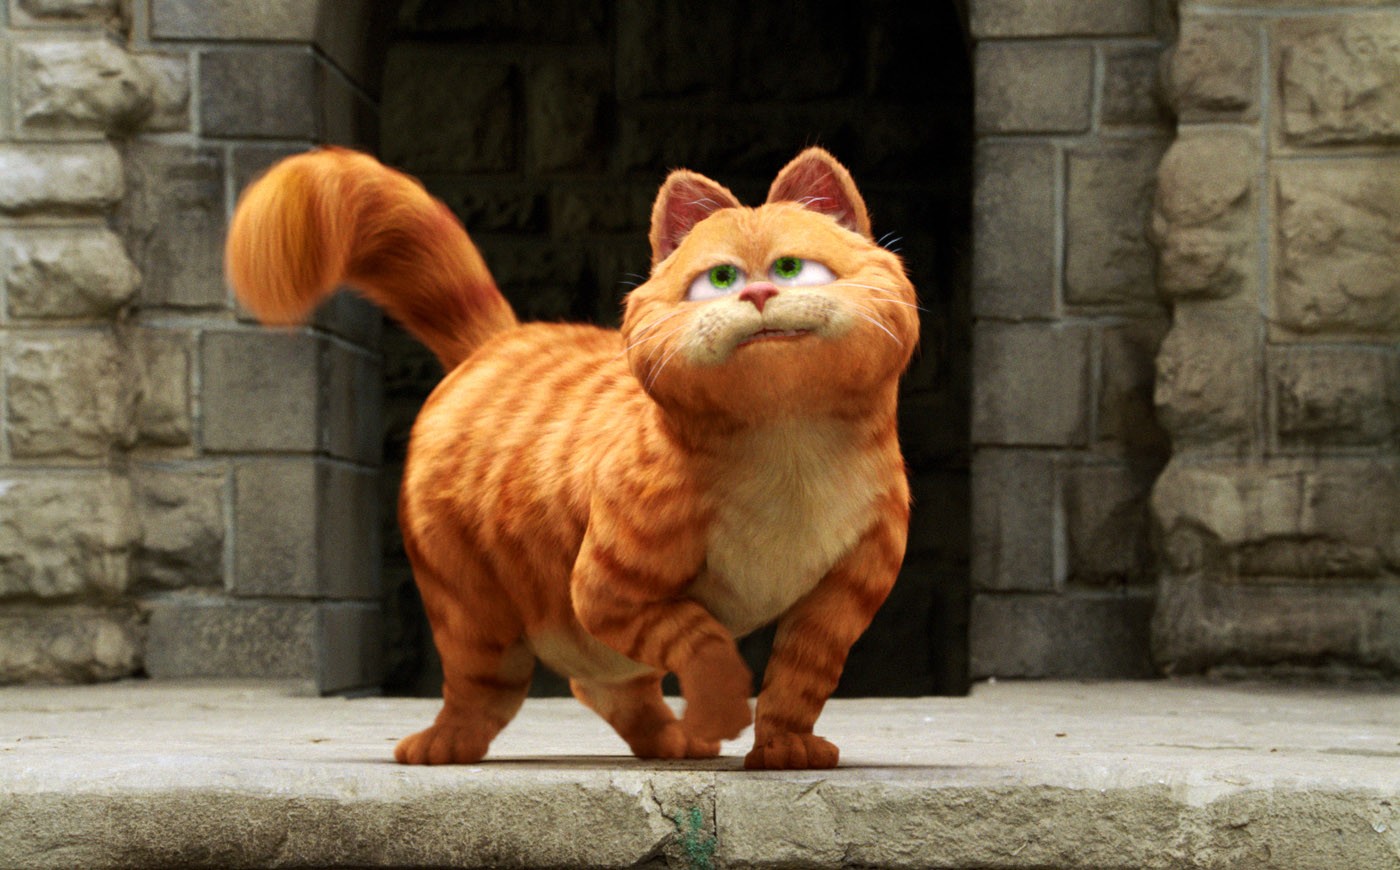 Cats - GARFIELD: A TALE OF TWO KITTIES, Garfield, (voiced by Bill Murray), 2006, TM & Copyright (c) 20th Century